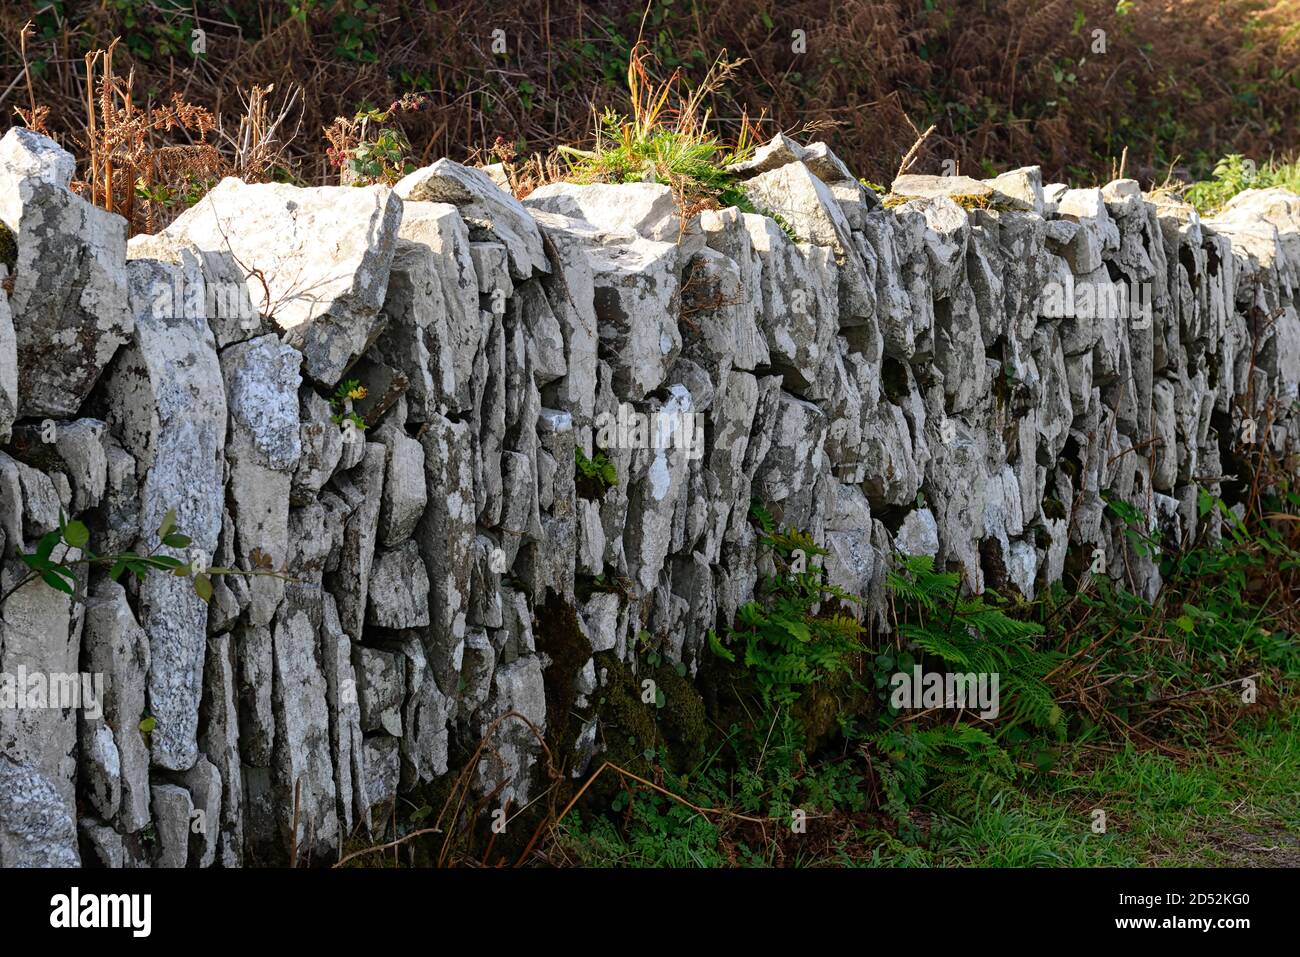 traditional dry stone wall,vertically stacked,weathered,wethering,lichen,lichens,mosses,west cork,rural ireland,RM Ireland Stock Photo